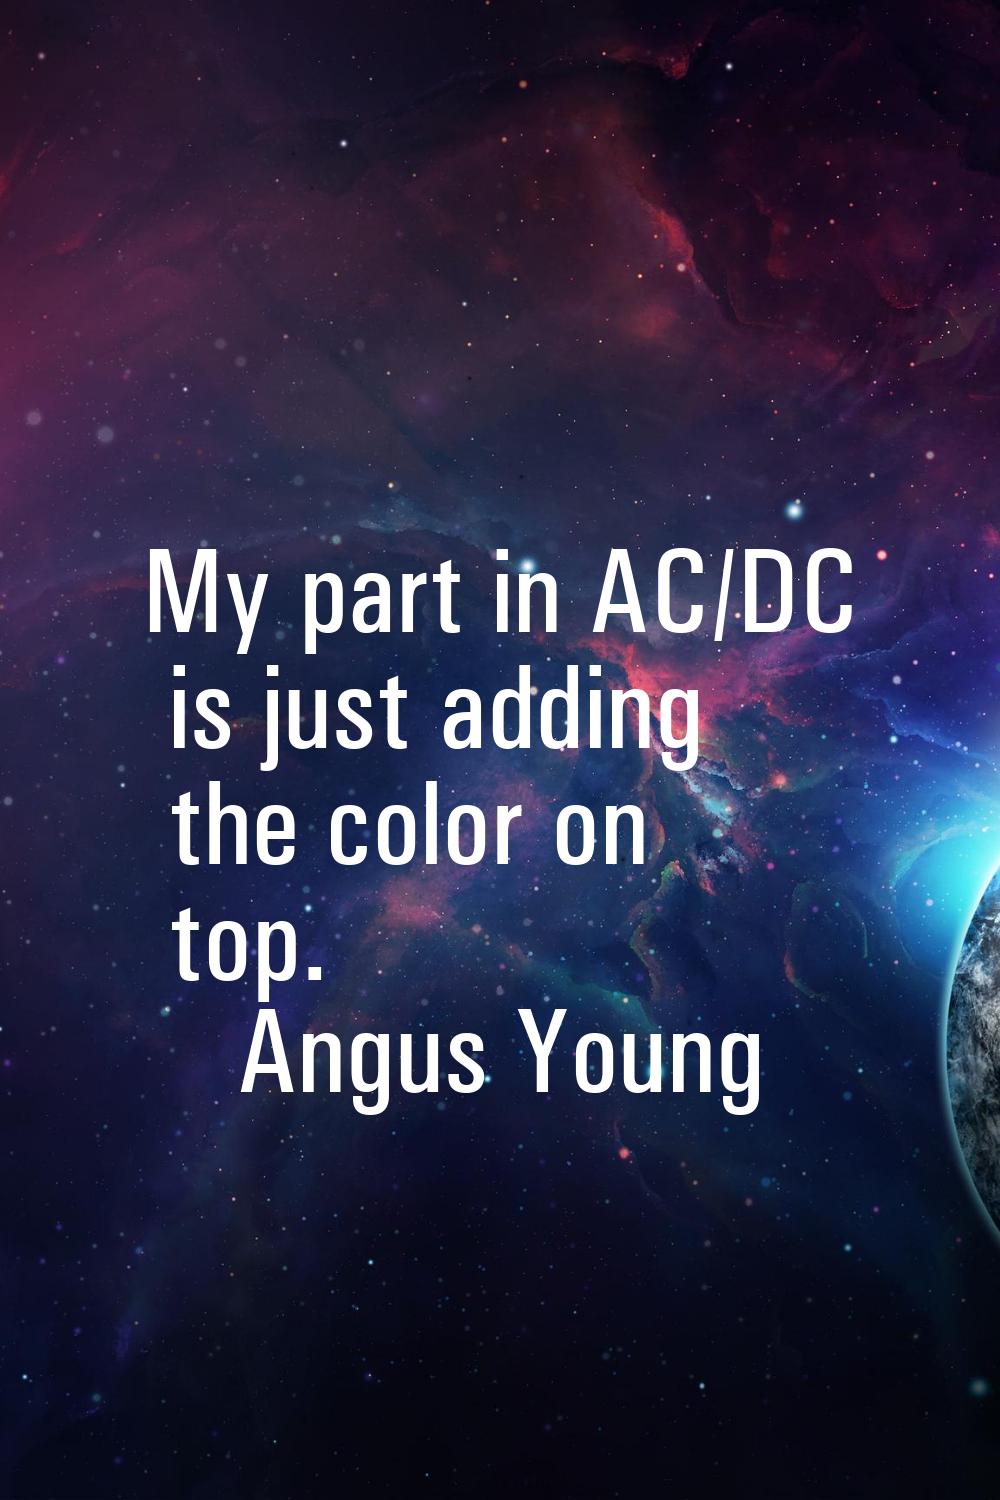 My part in AC/DC is just adding the color on top.